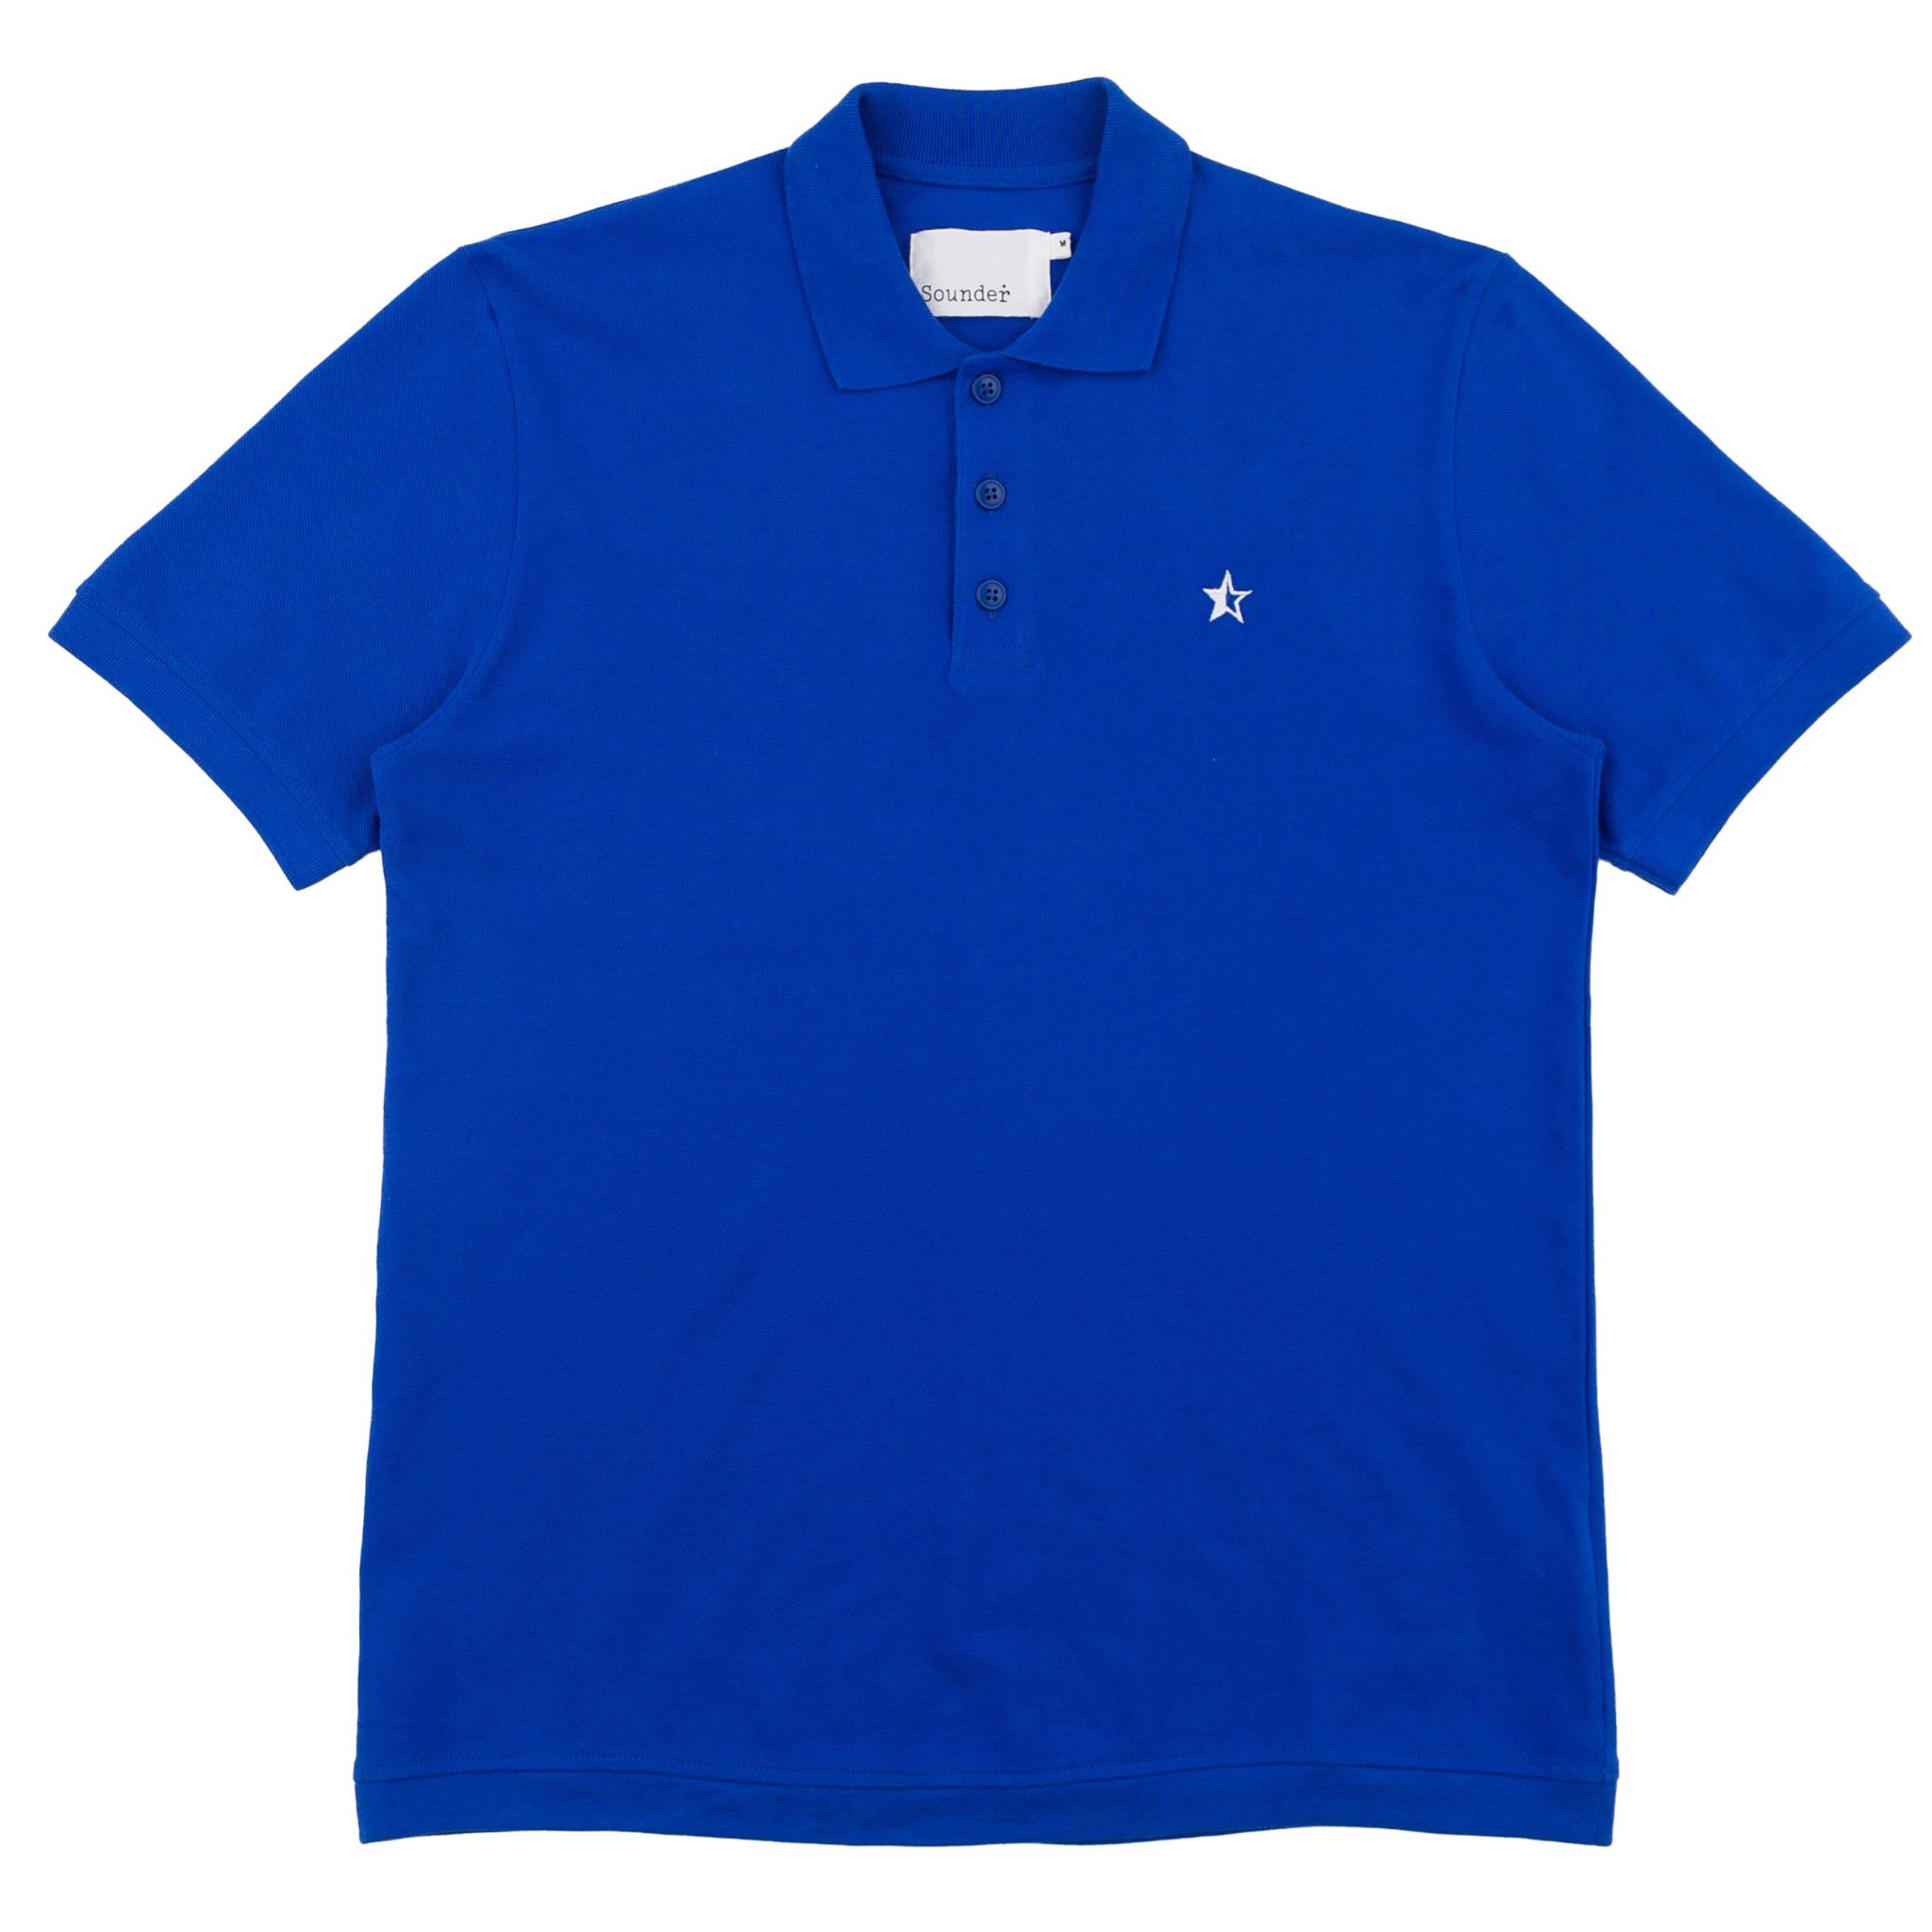 Men’s Blue Play Well Polo - Cobalt Small Sounder